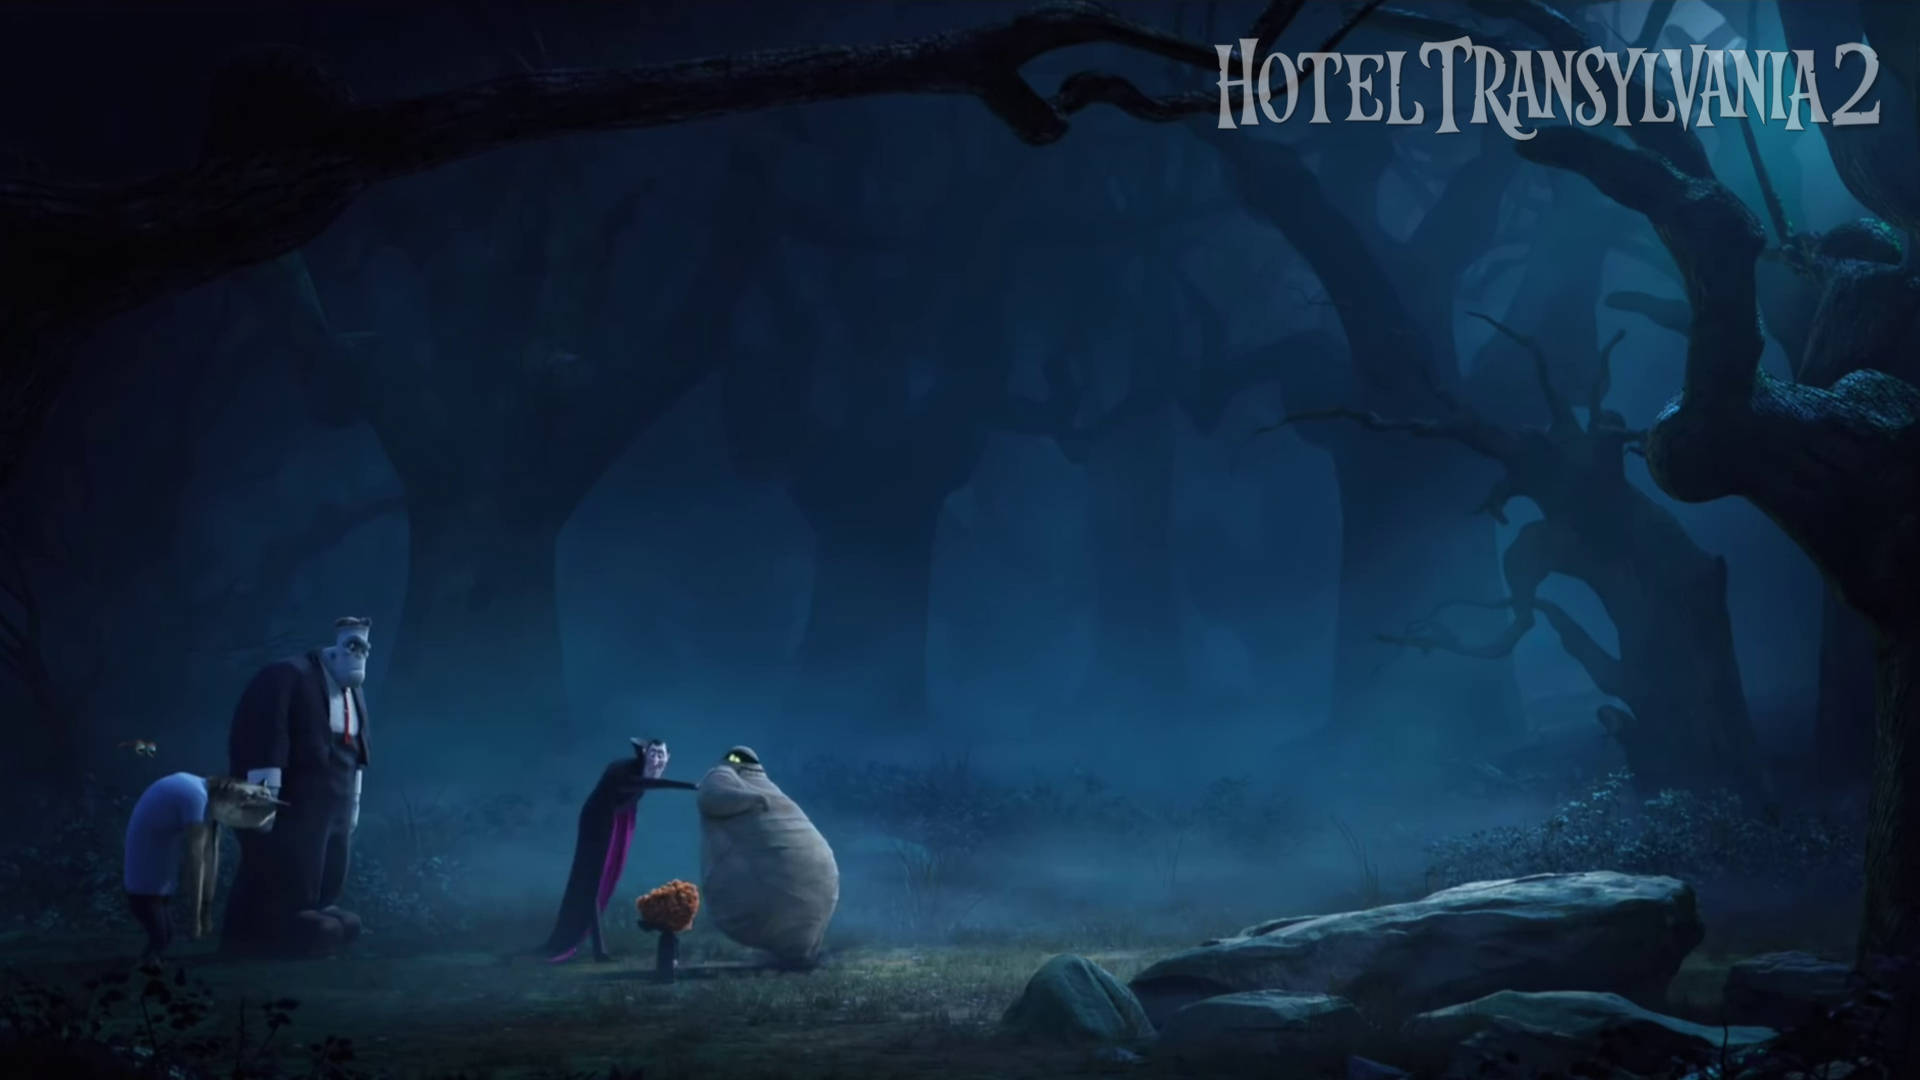 Hotel Transylvania 2 In The Forest Wallpaper